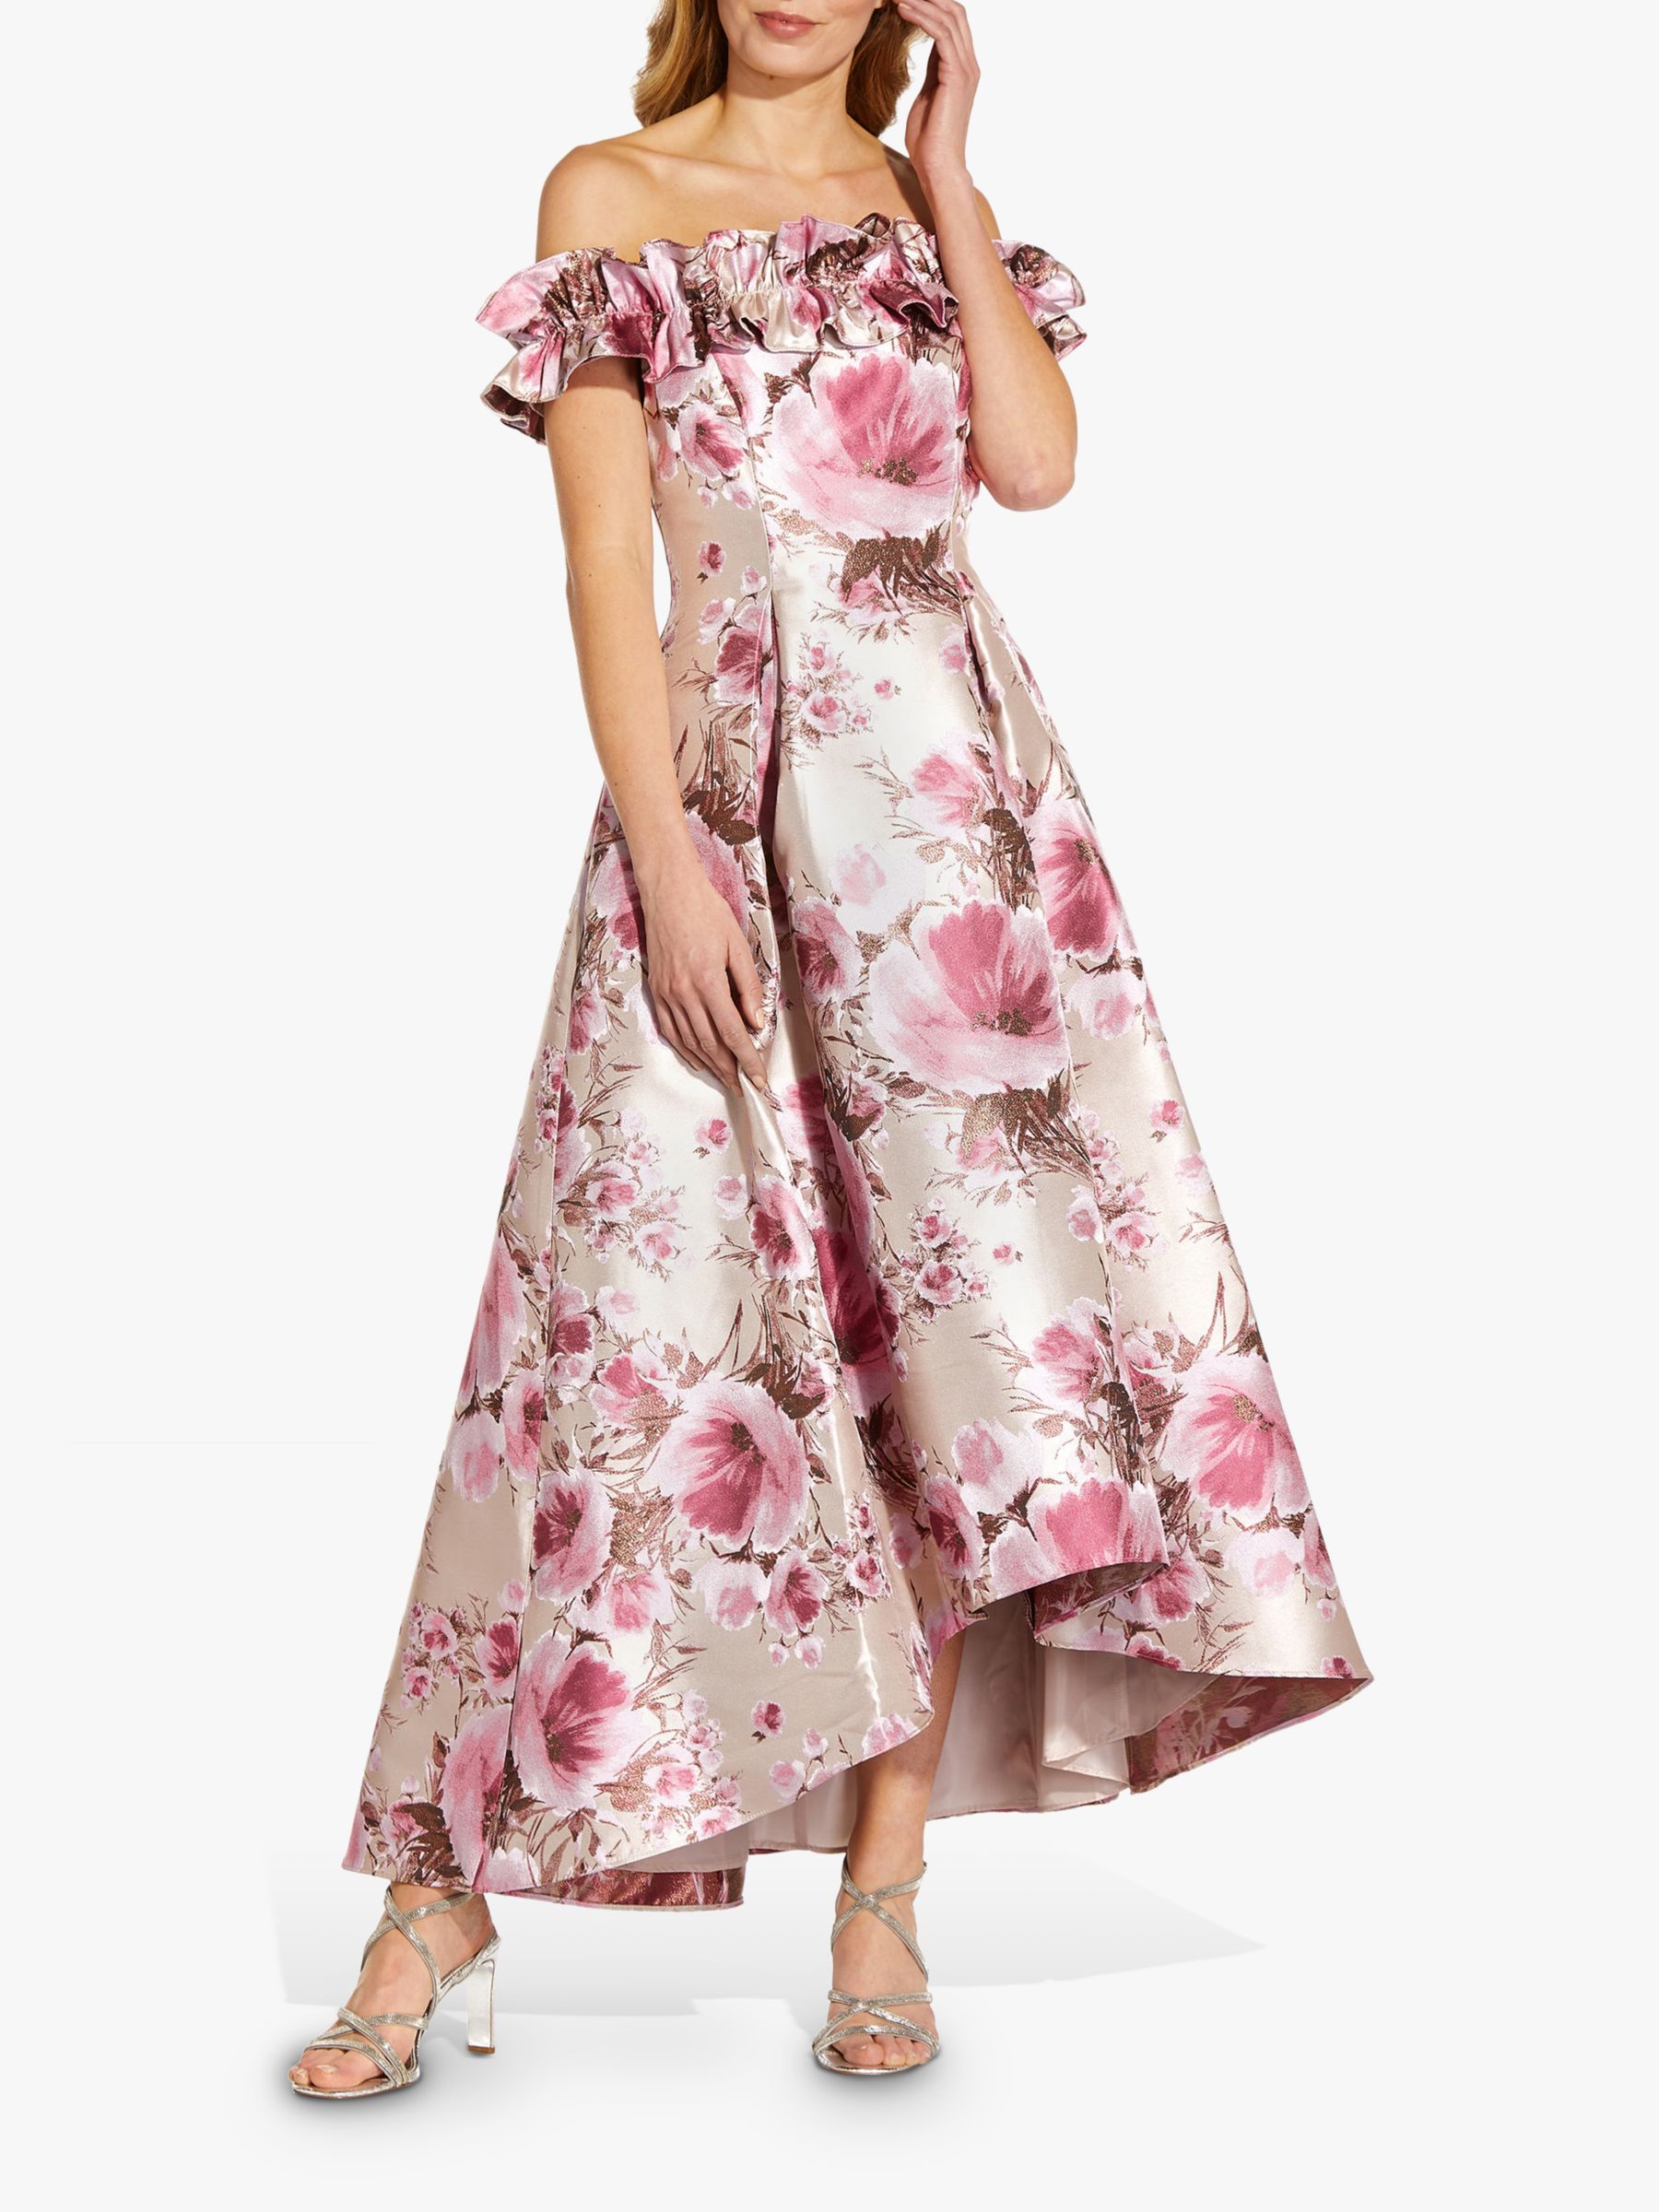 adrianna papell floral gown | Dresses Images 2022